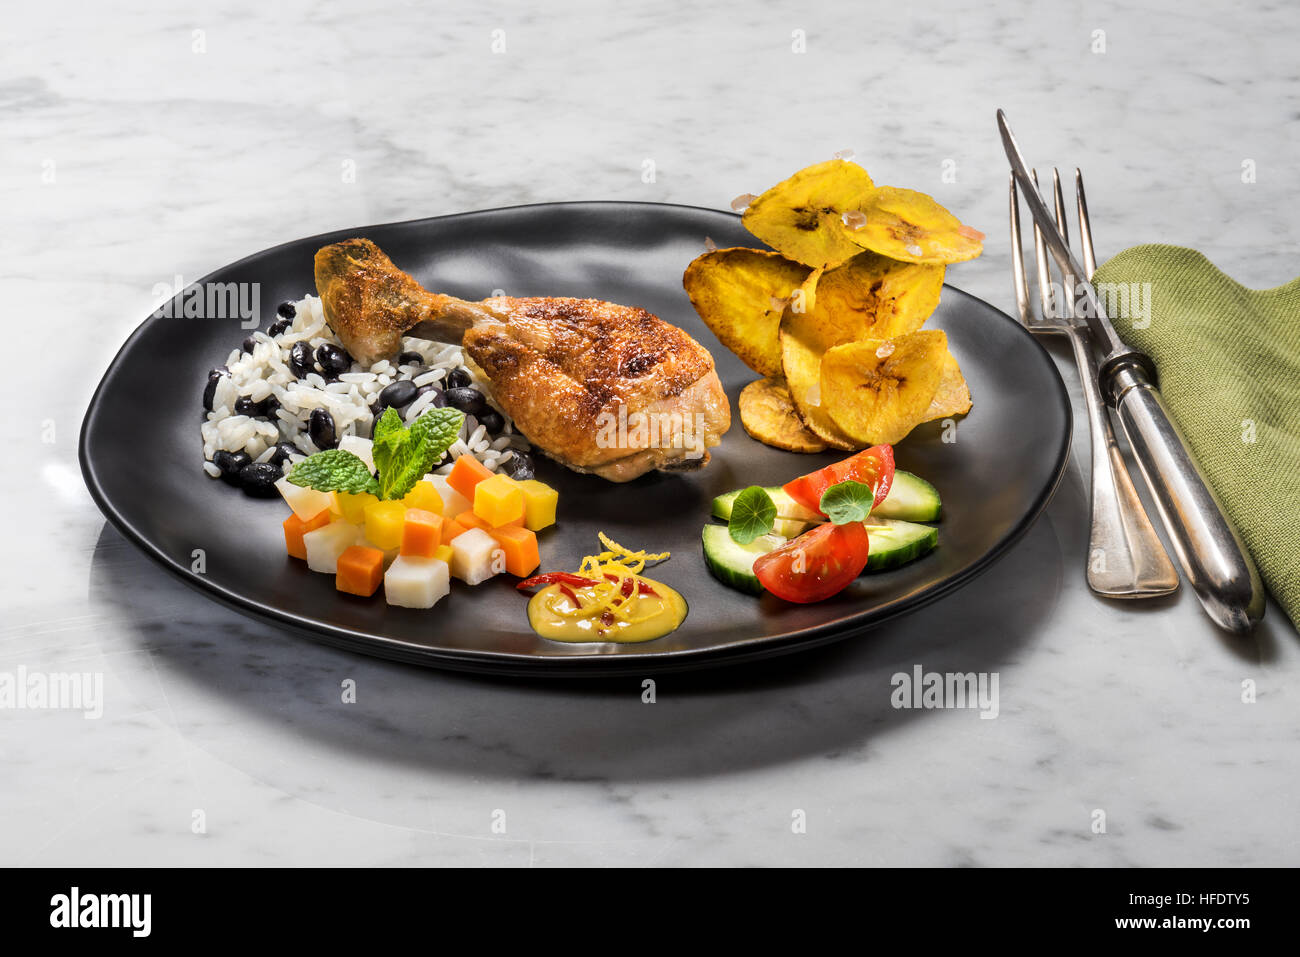 Typical Cuban food, chicken, rice with black beans, fried banana chips, salad and vegetables. CUBA. kuba FOOD Style styling food Stock Photo